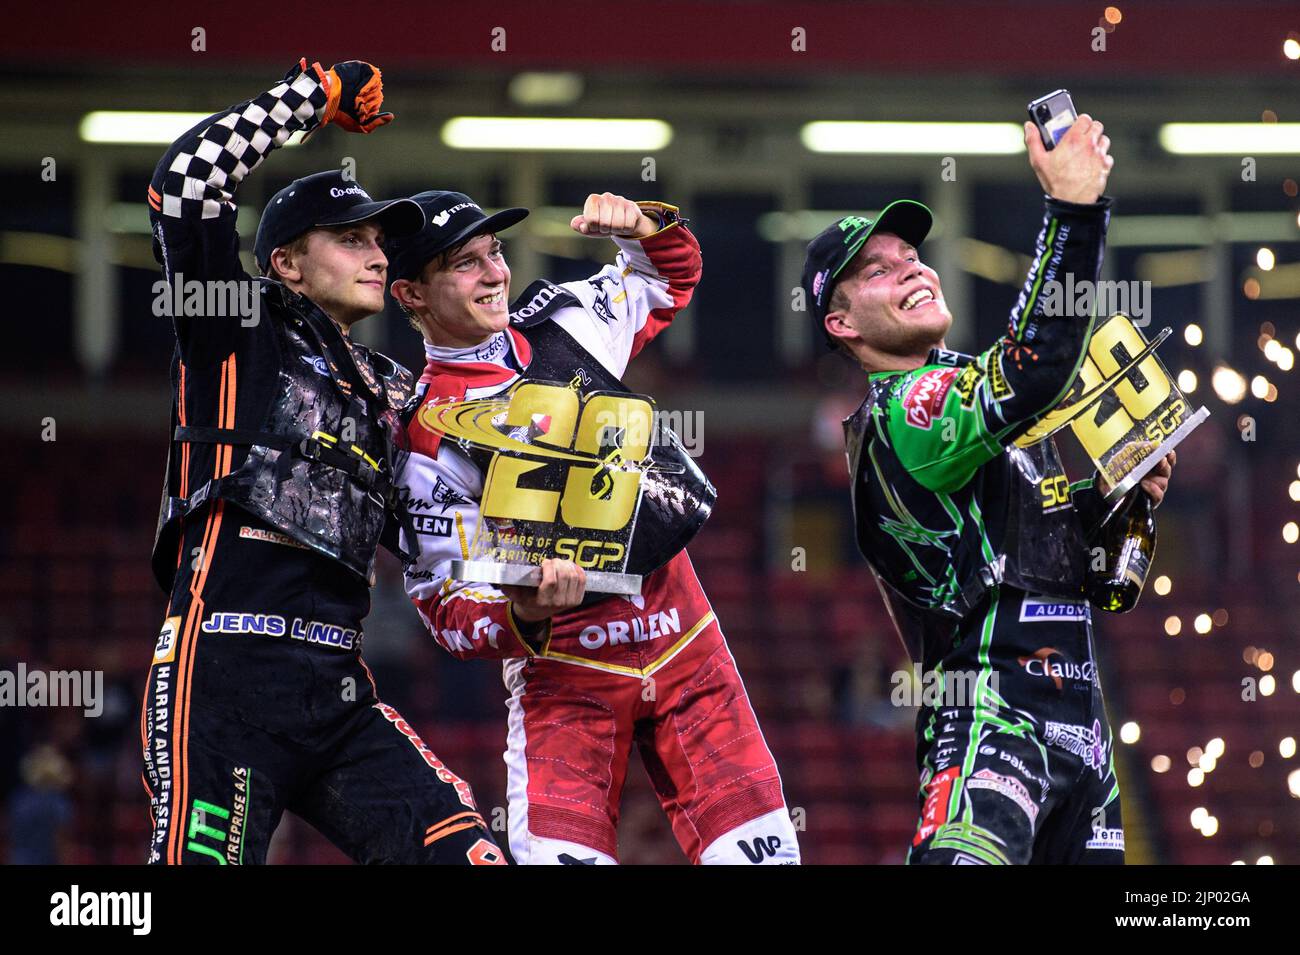 Selfie time during the FIM Speedway Grand Prix 2 of Great Britain at the Principality Stadium, Cardiff on Sunday 14th August 2022. (Credit: Ian Charles | MI News) Credit: MI News & Sport /Alamy Live News Stock Photo